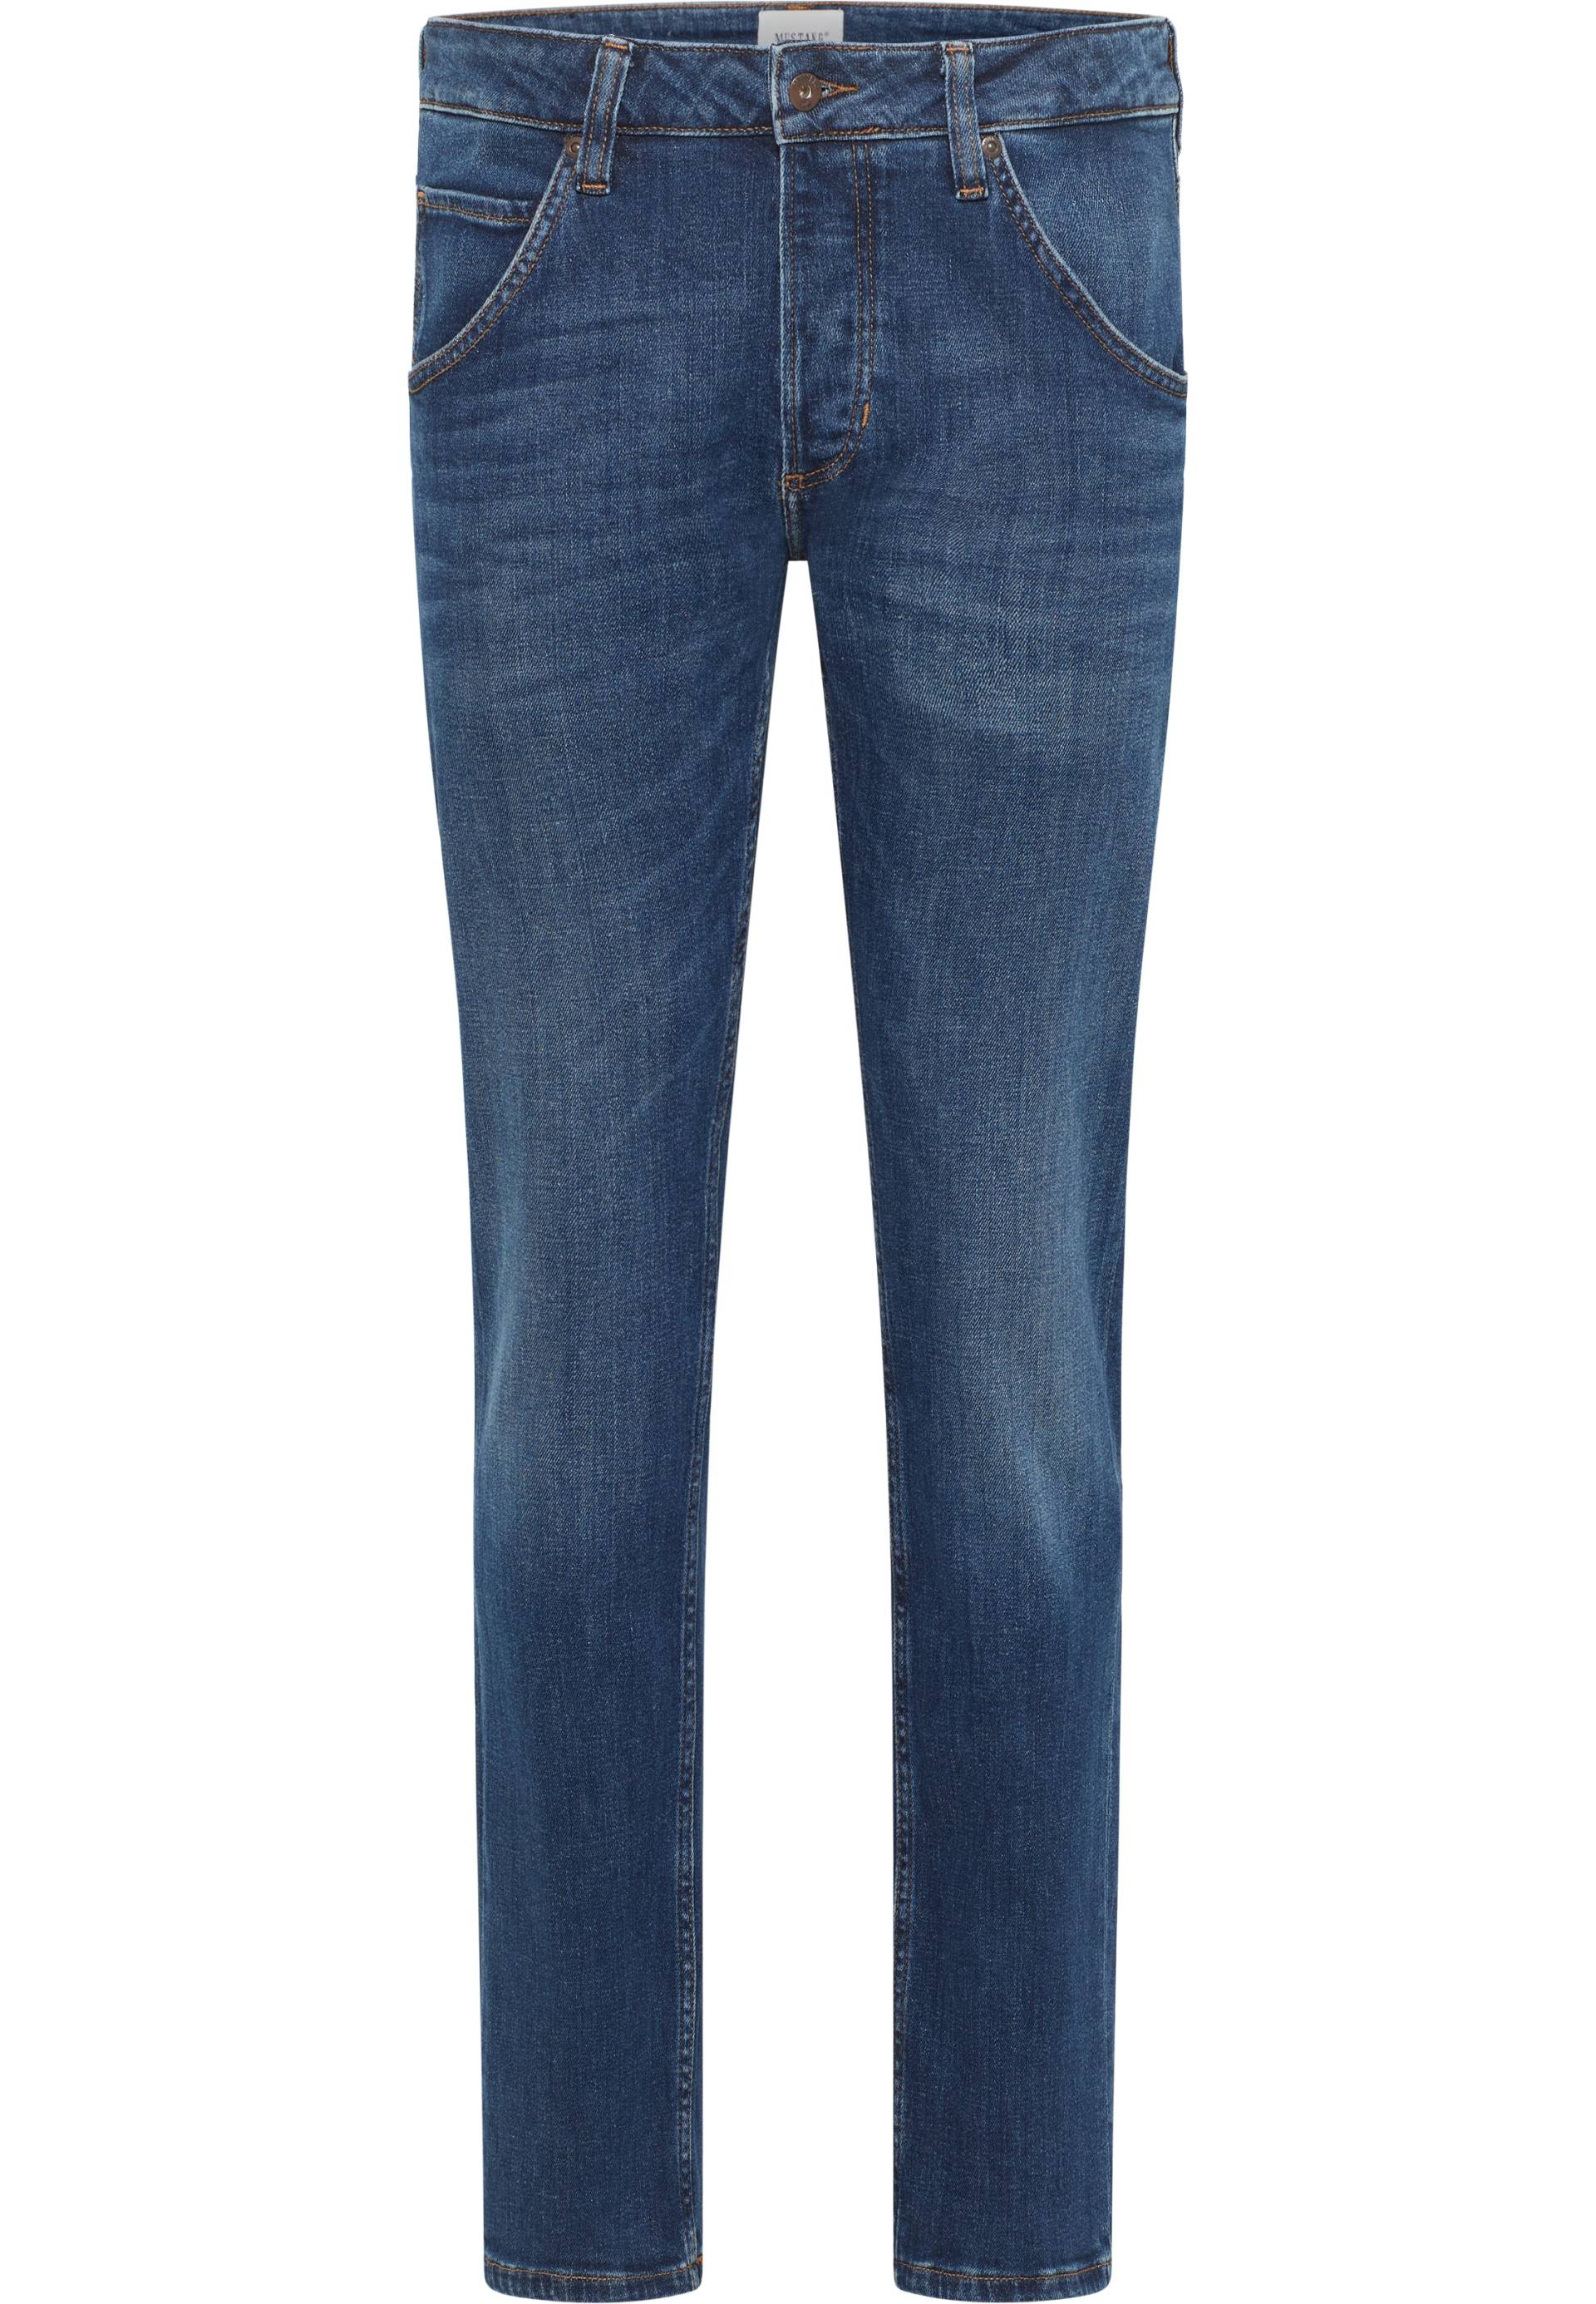 MUSTANG 5-Pocket-Jeans »Style Michigan Straight« von mustang